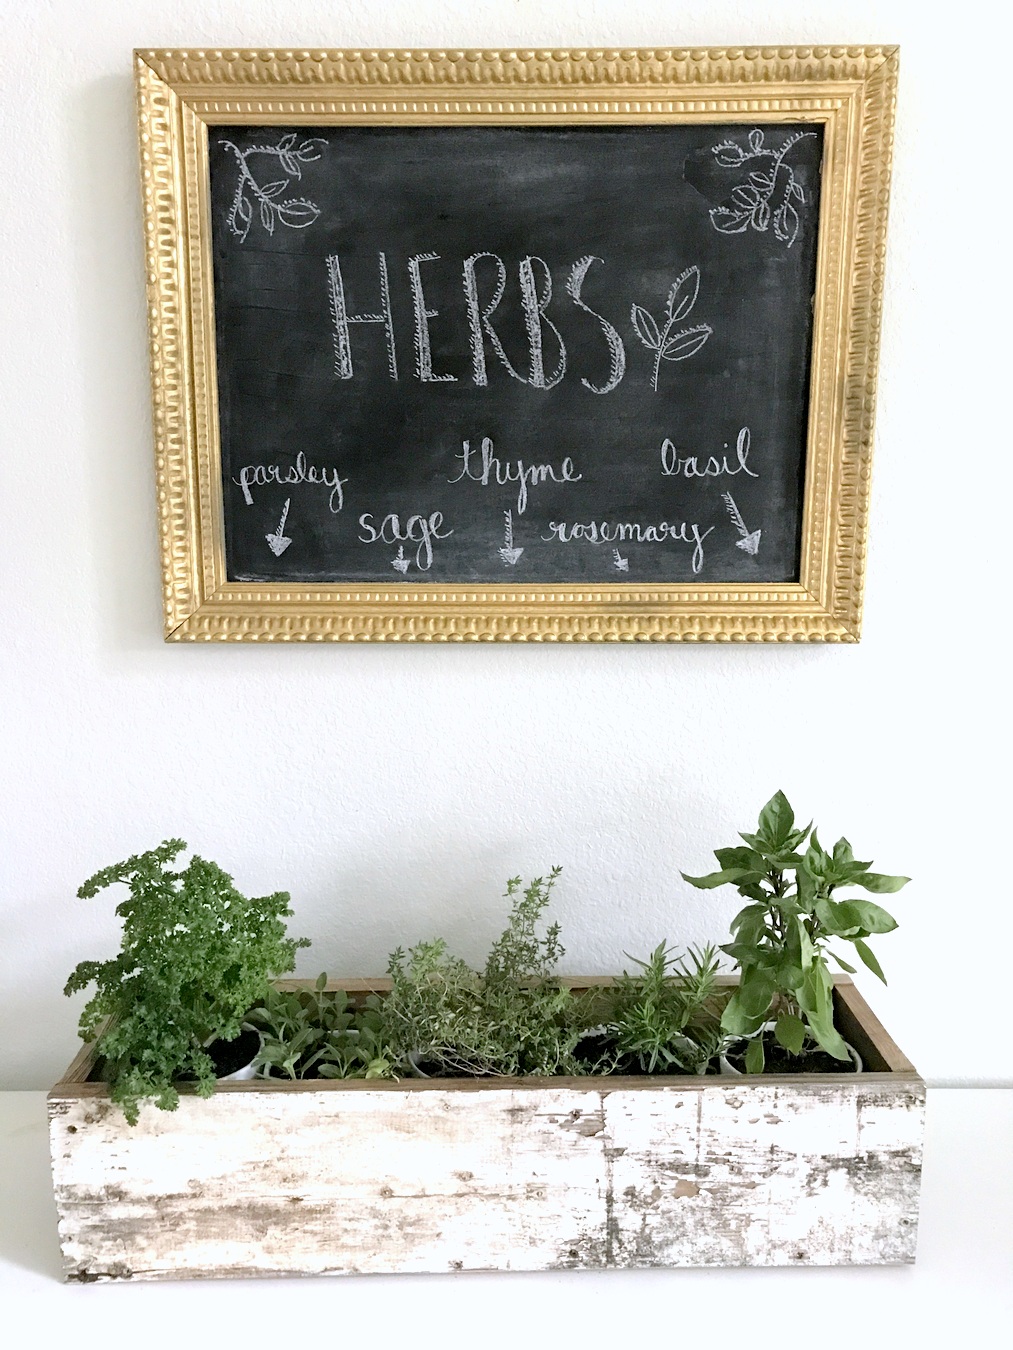 Help your garden transition from summer to fall with this DIY herb planter box